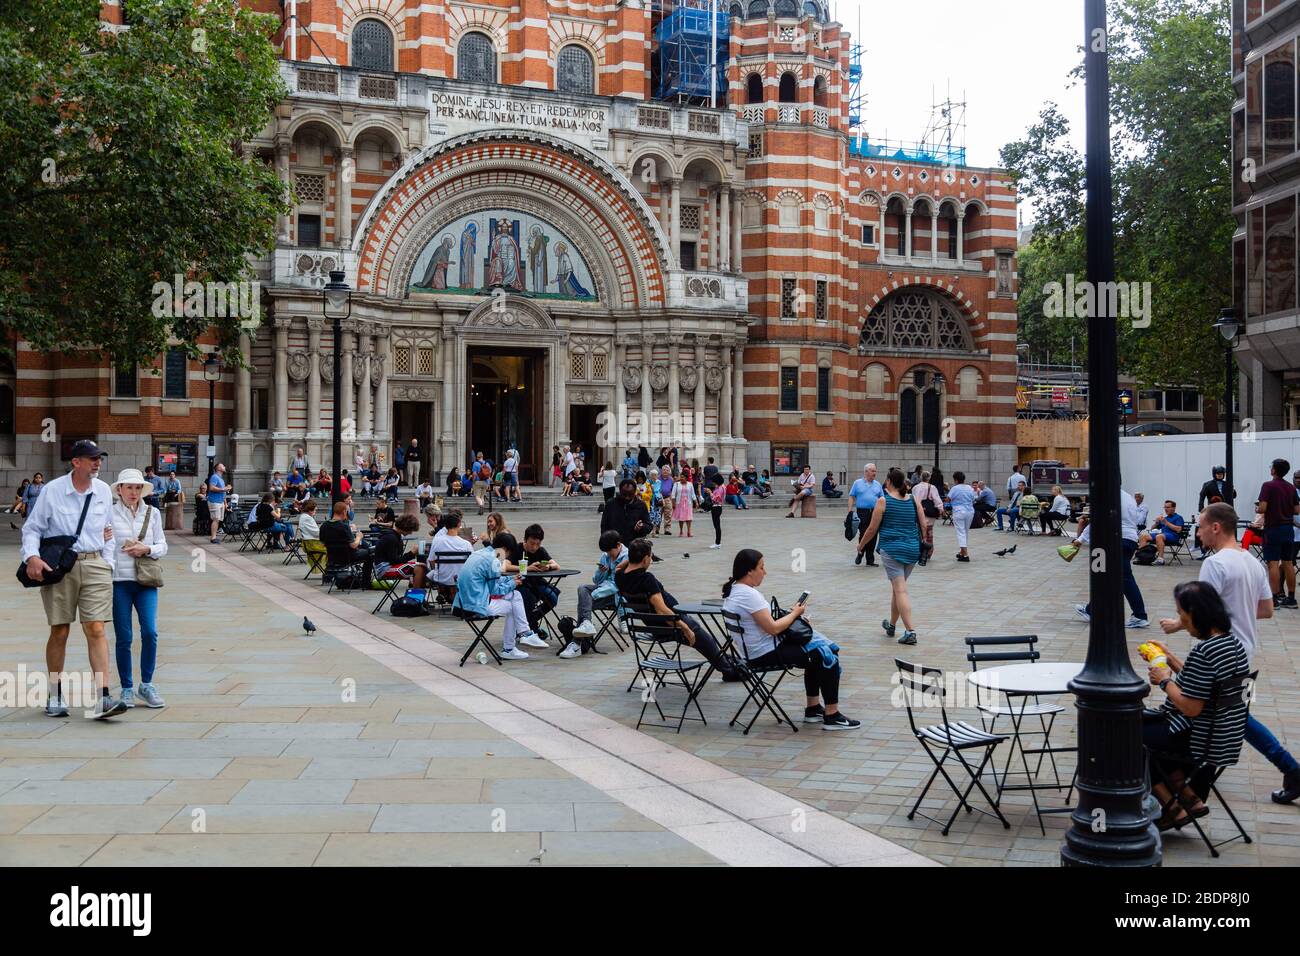 Westminster Cathedral is the mother church of the Roman Catholic Church in England and Wales. It is located in the City of Westminster, Greater London. Stock Photo